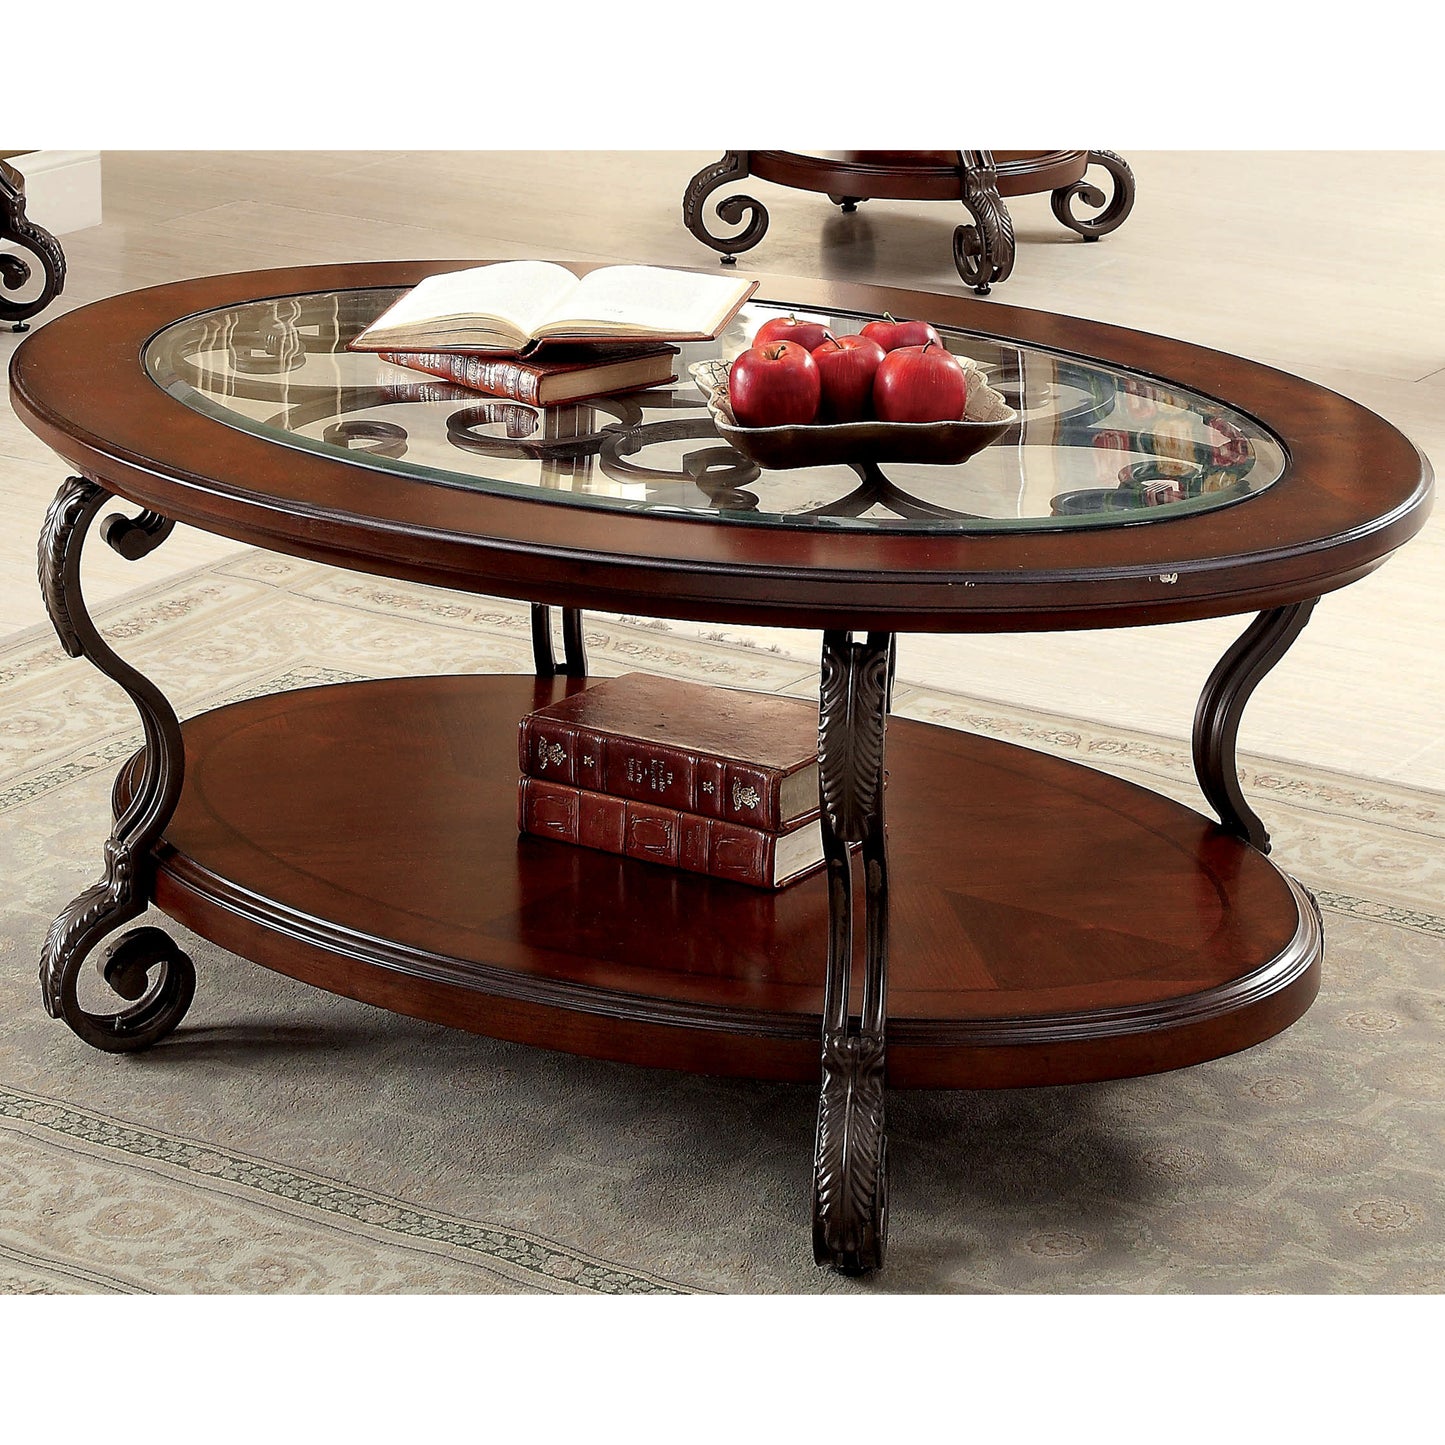 Angled traditional brown cherry and glass oval coffee table with a lower shelf on a rug with accessories